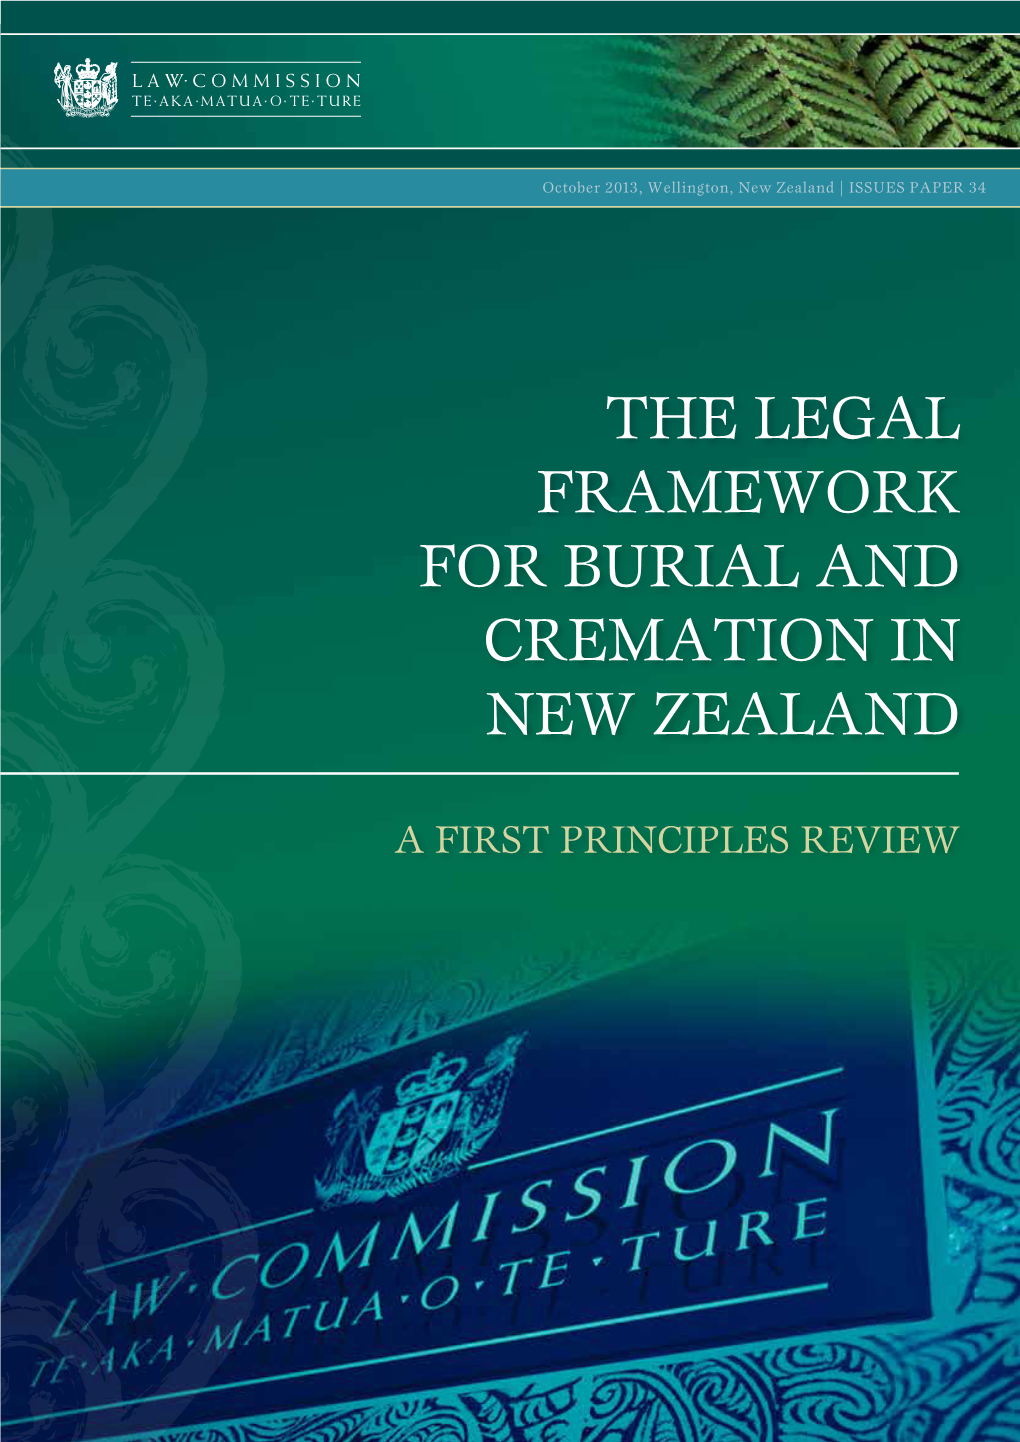 NZLC IP34 the Legal Framework for Burial and Cremation in New Zealand